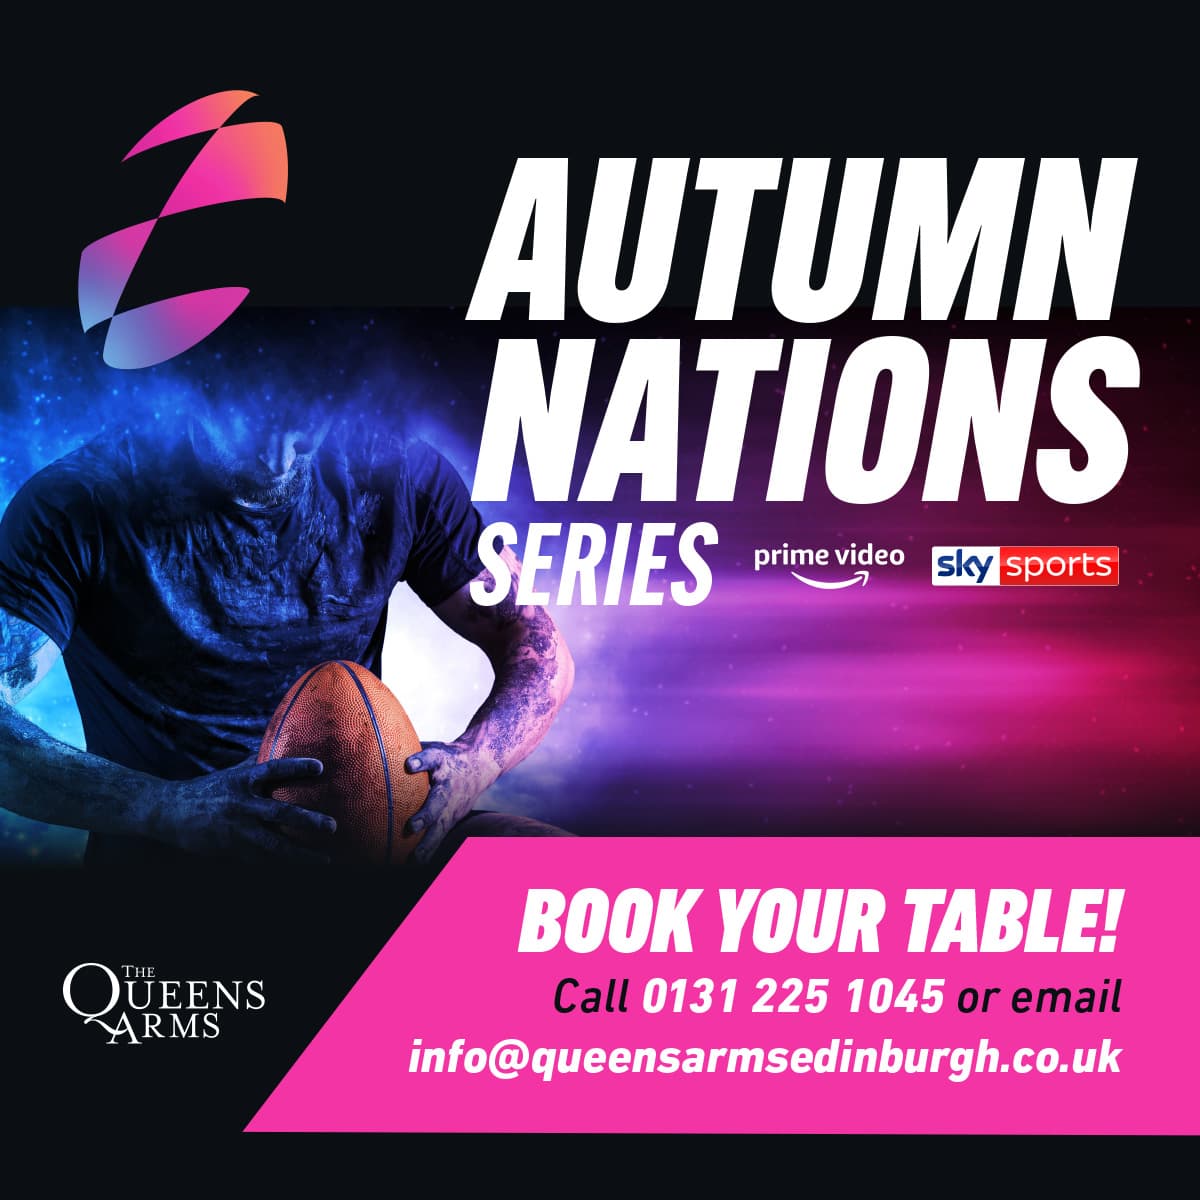 Watch the Autumn Nations in Edinburgh The Queens Arms